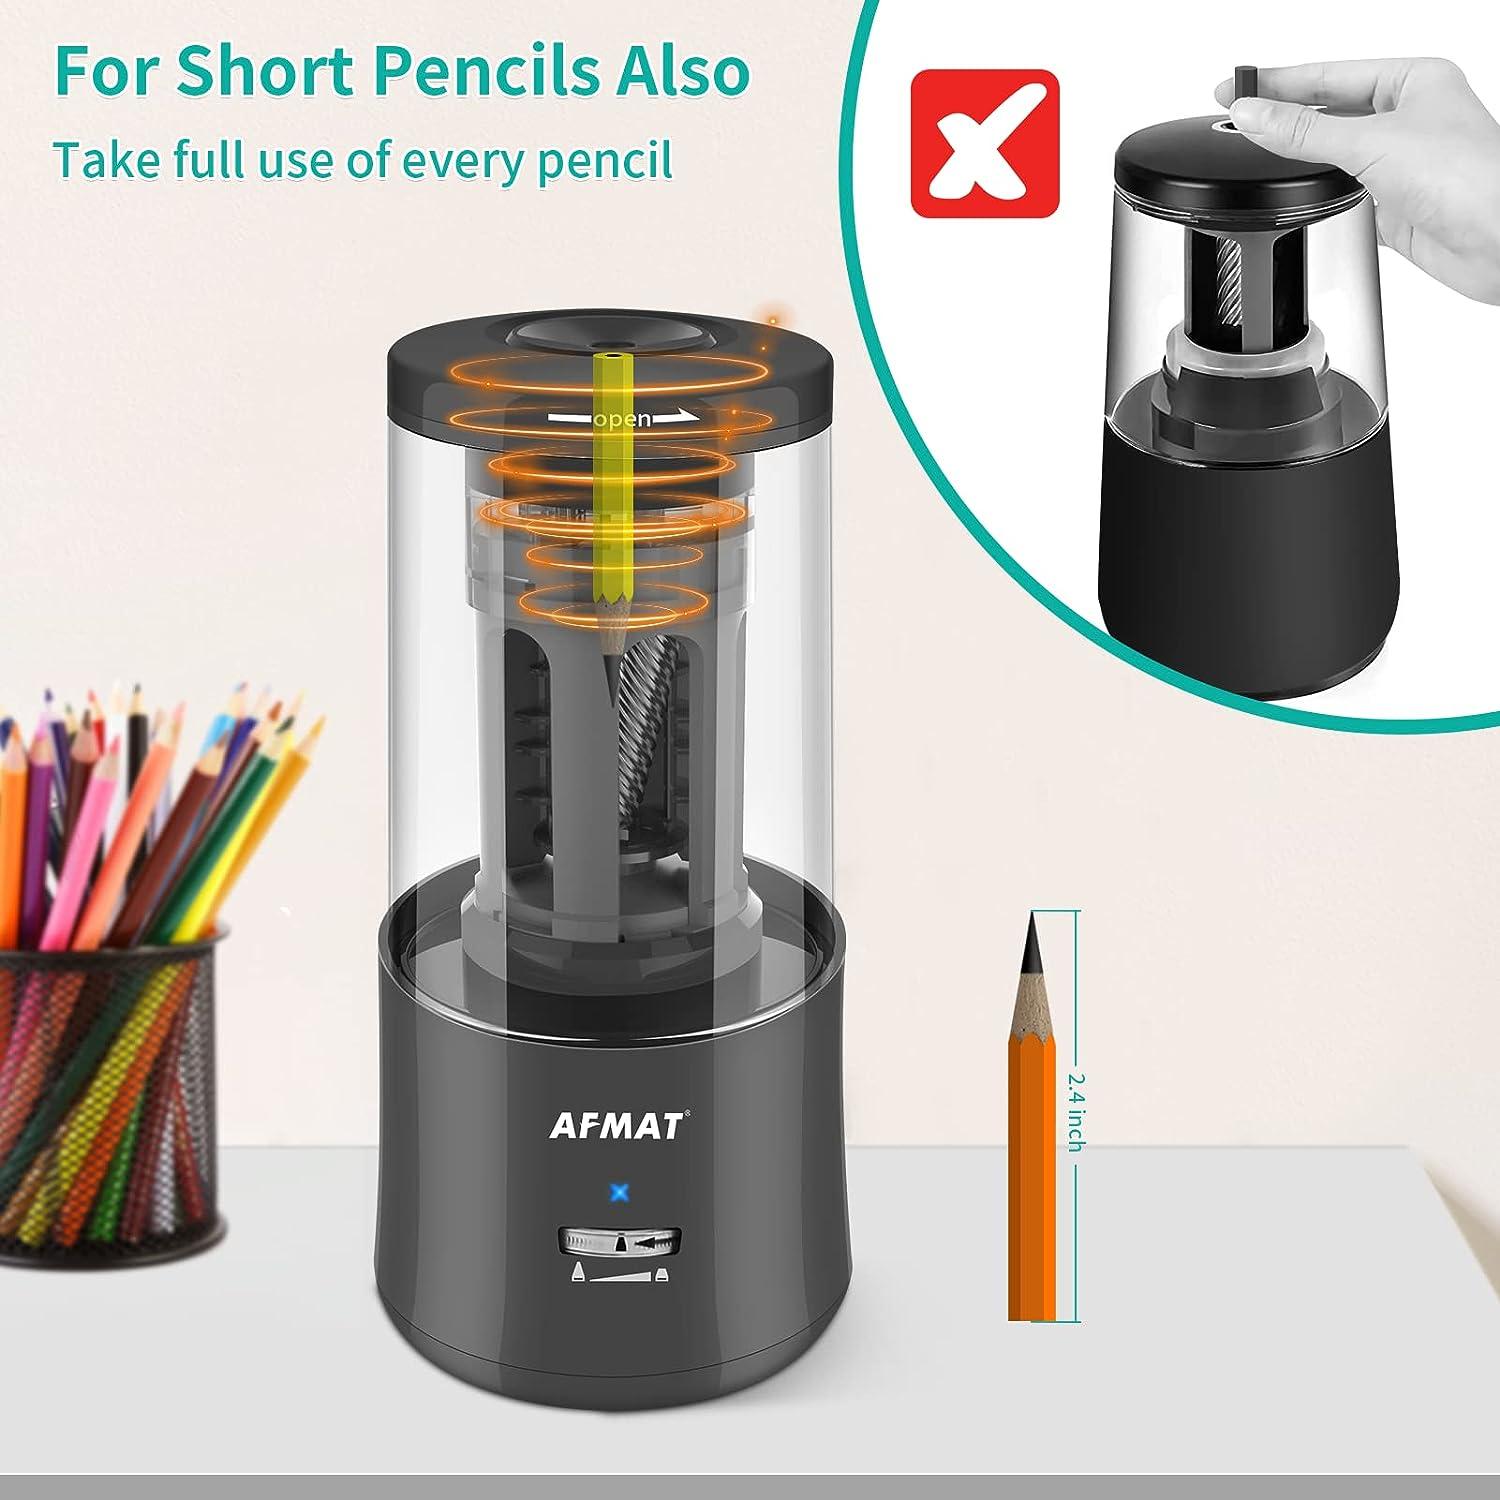 Fully Automatic Small Battery Operated Electric Pencil Sharpener, Colored  Pencil Sharpeners, Hands Free Pencil Sharpener for 8mm Pencils, AFMAT  Pencil